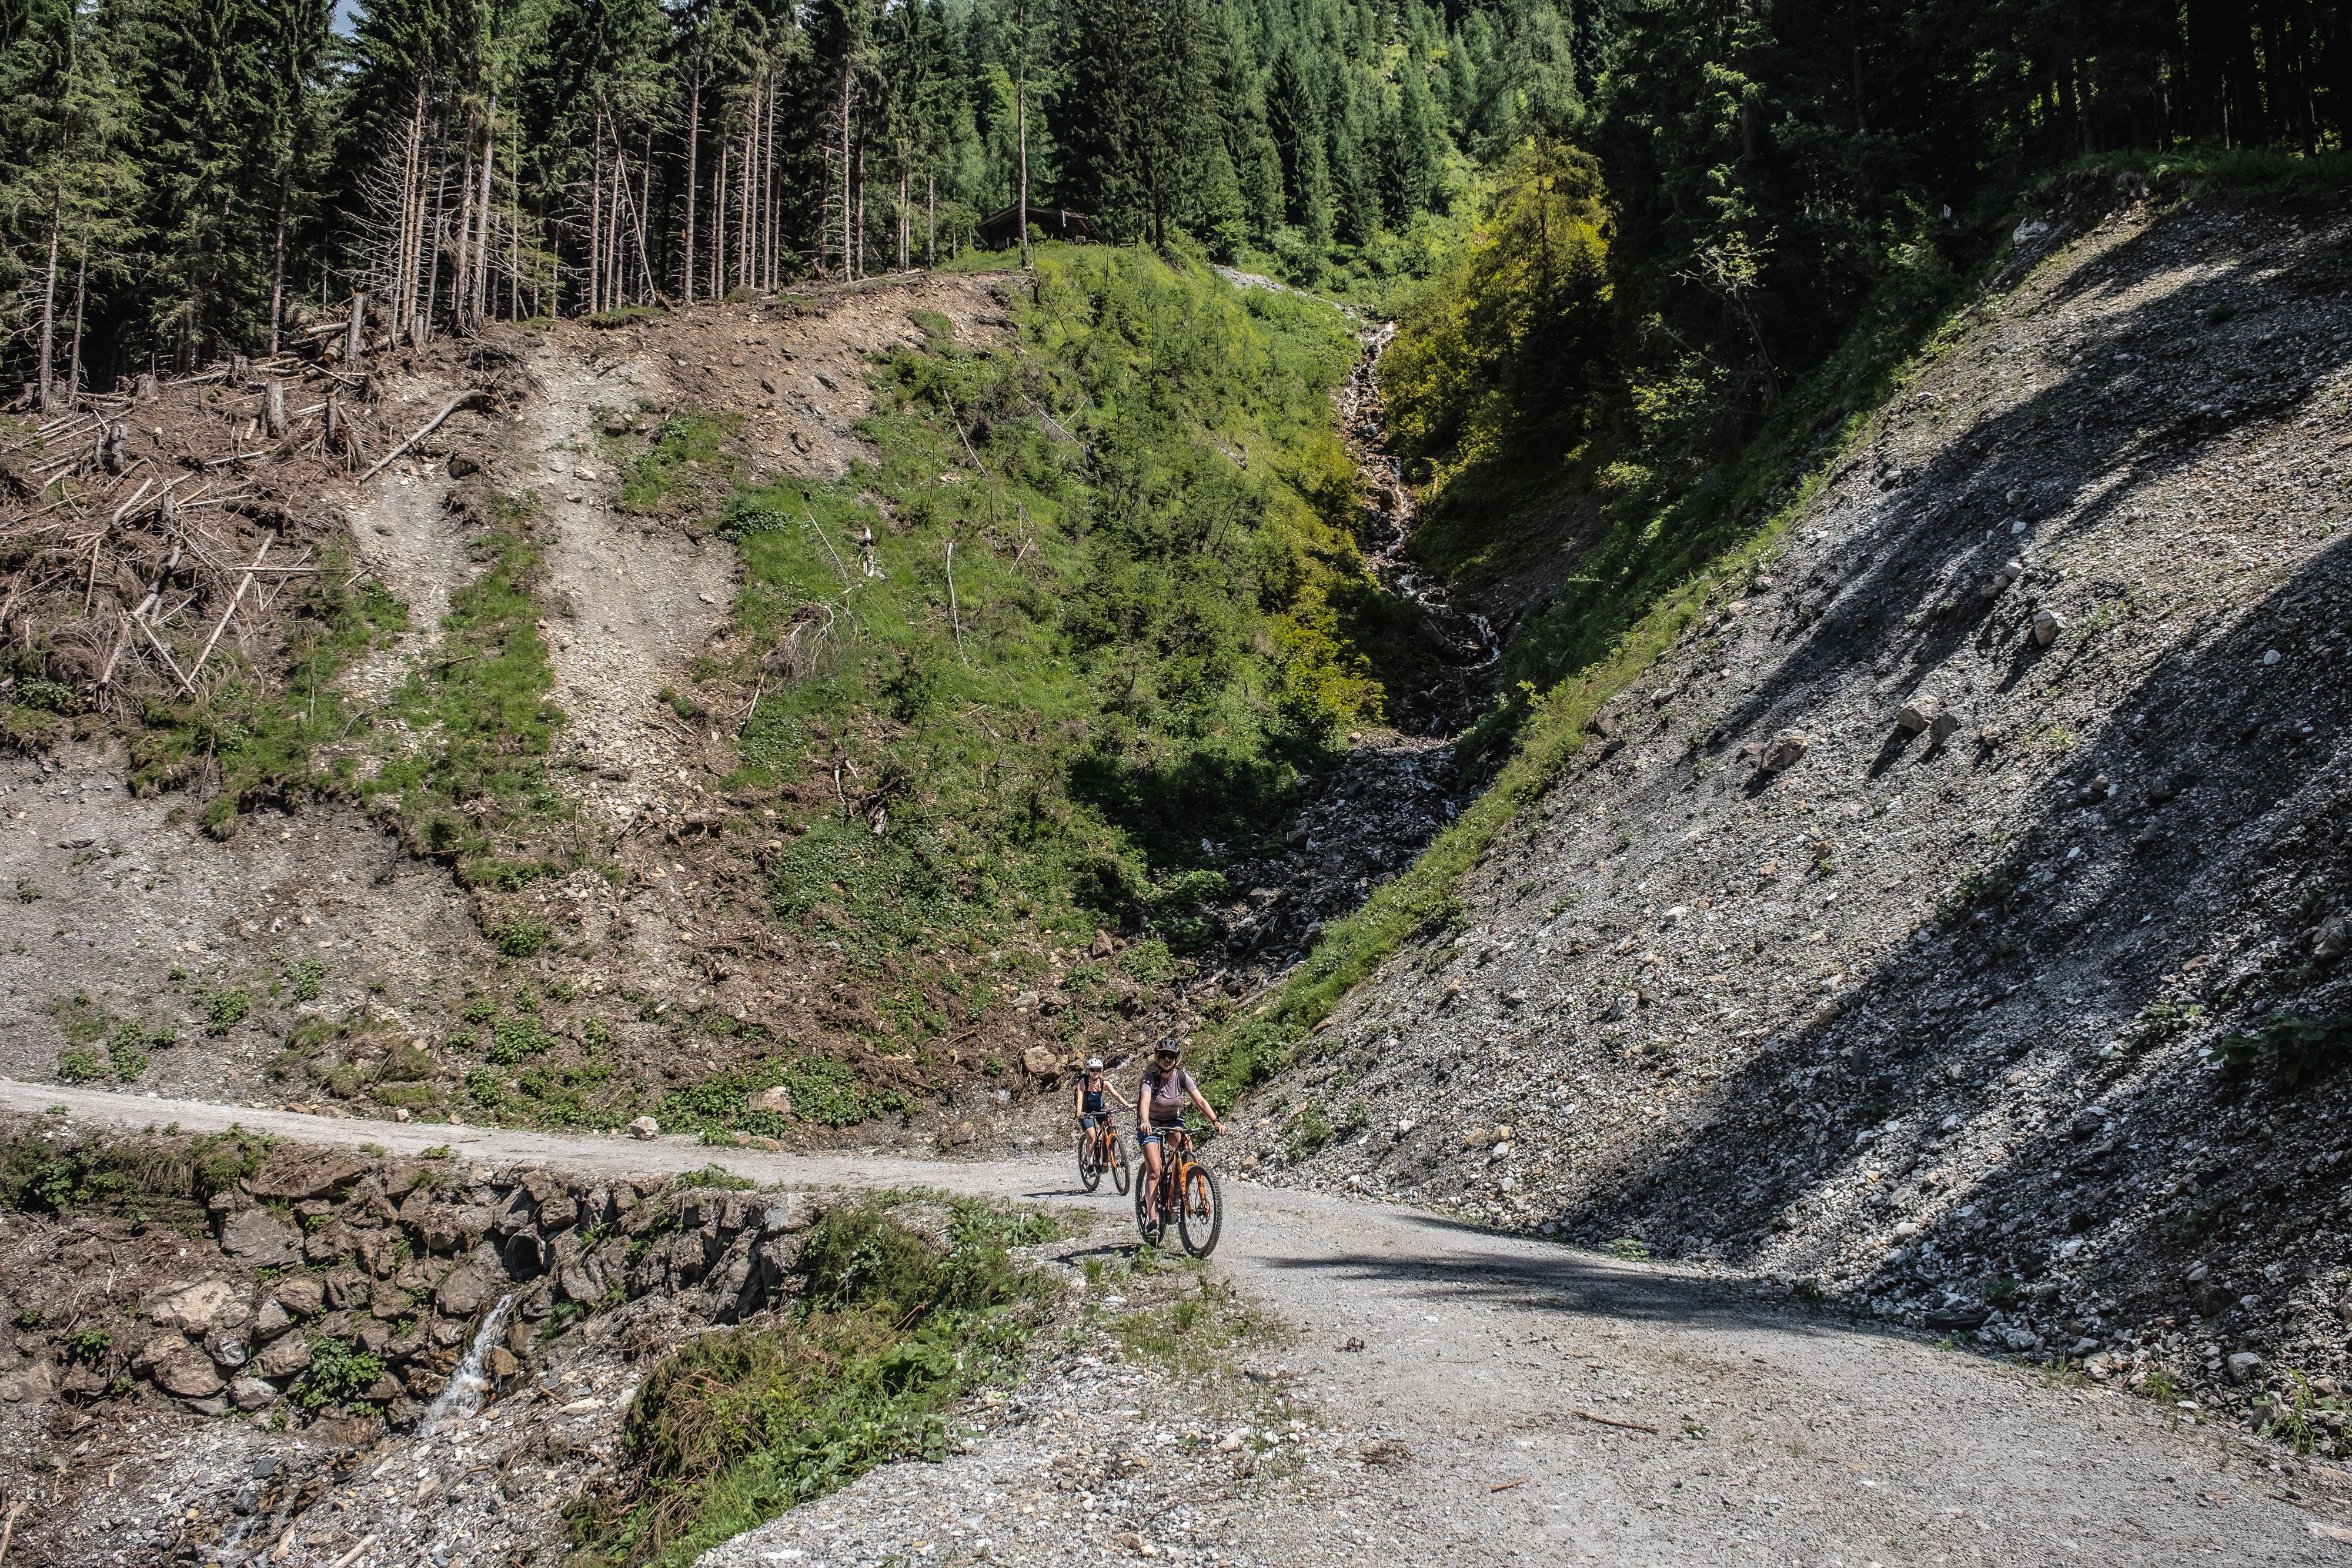 The descent on Rettensteinrunde takes you down the alpine climb on perfect gravel.